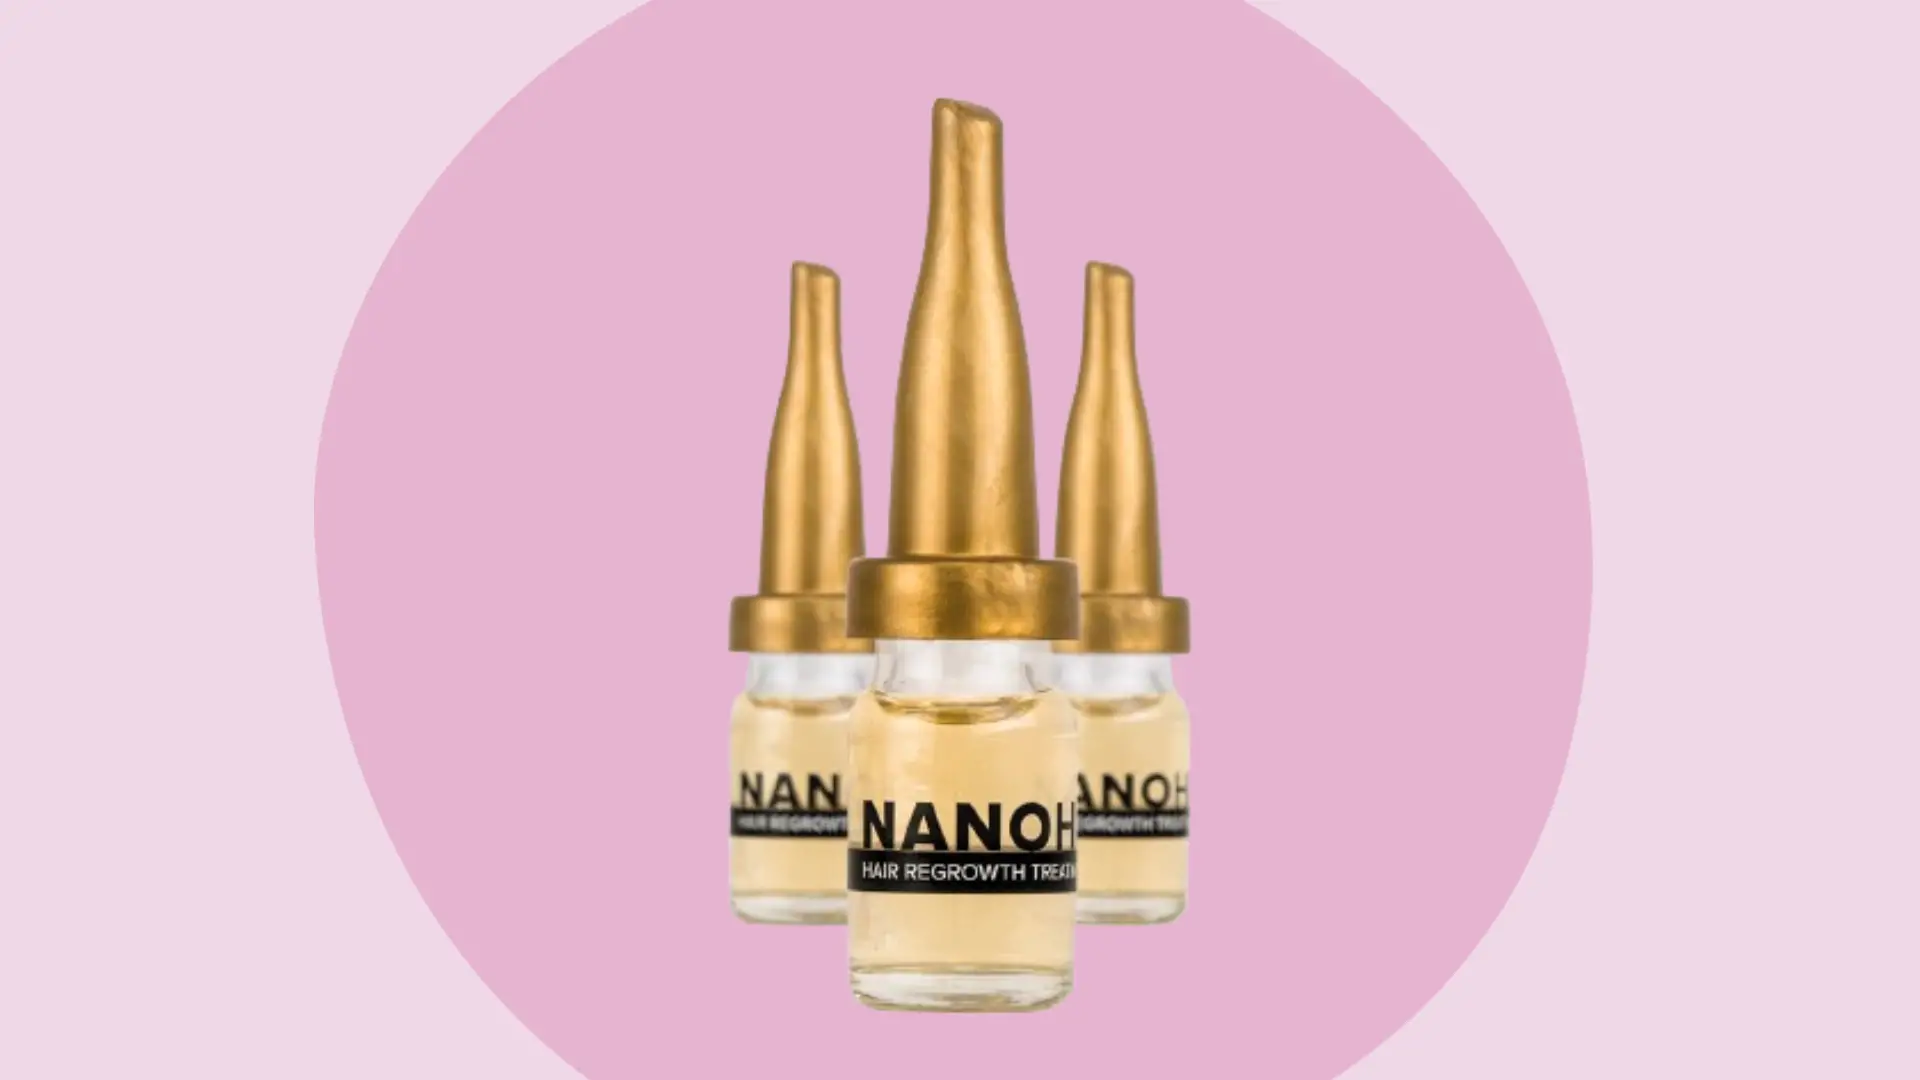 Nanohair Review: Worth A Try Or Complete Scam?